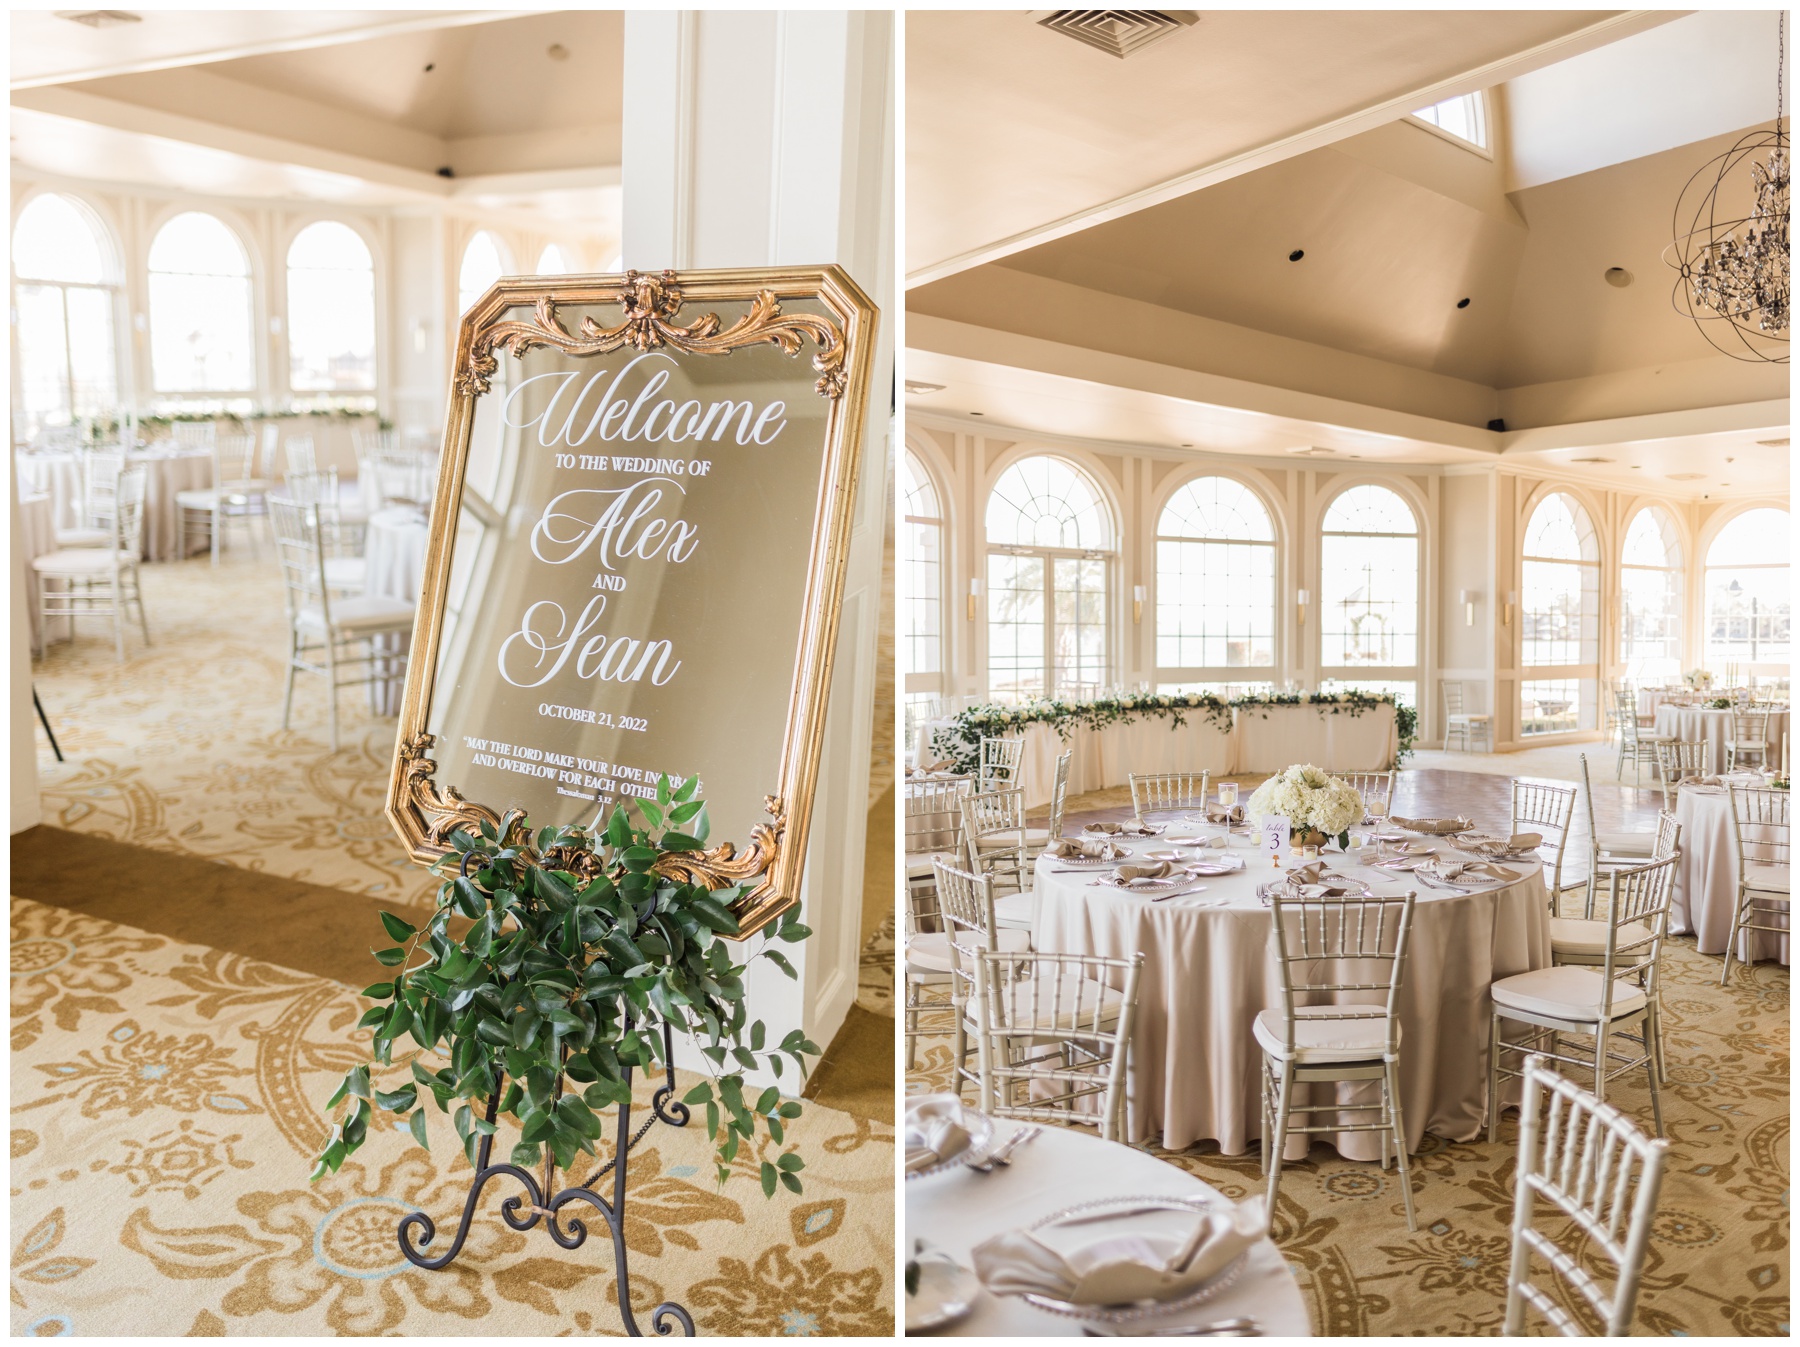 Mirror welcome sign with ornate gold trim and calligraphy at a wedding reception